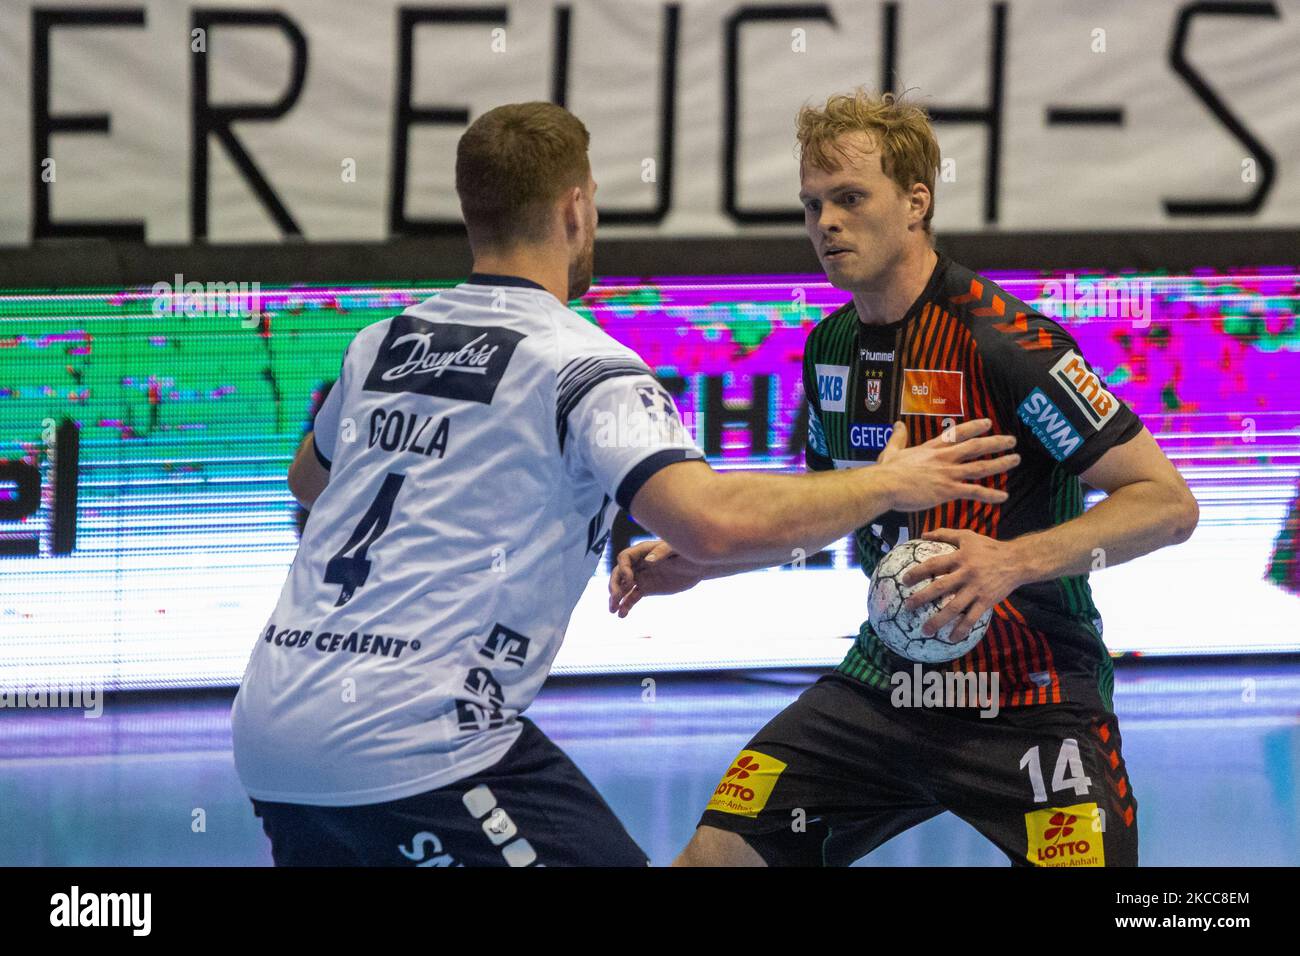 Ómar Ingi Magnússon (right) of Magdeburg is attacked by JOHANNES GOLLA (left) of SG Flensburg-Handewitt during the LIQUI MOLY Handball-Bundesliga match between SC Magdeburg and SG Flensburg-Handewitt at GETEC-Arena on April 04, 2021 in Magdeburg, Germany. (Photo by Peter Niedung/NurPhoto) Stock Photo